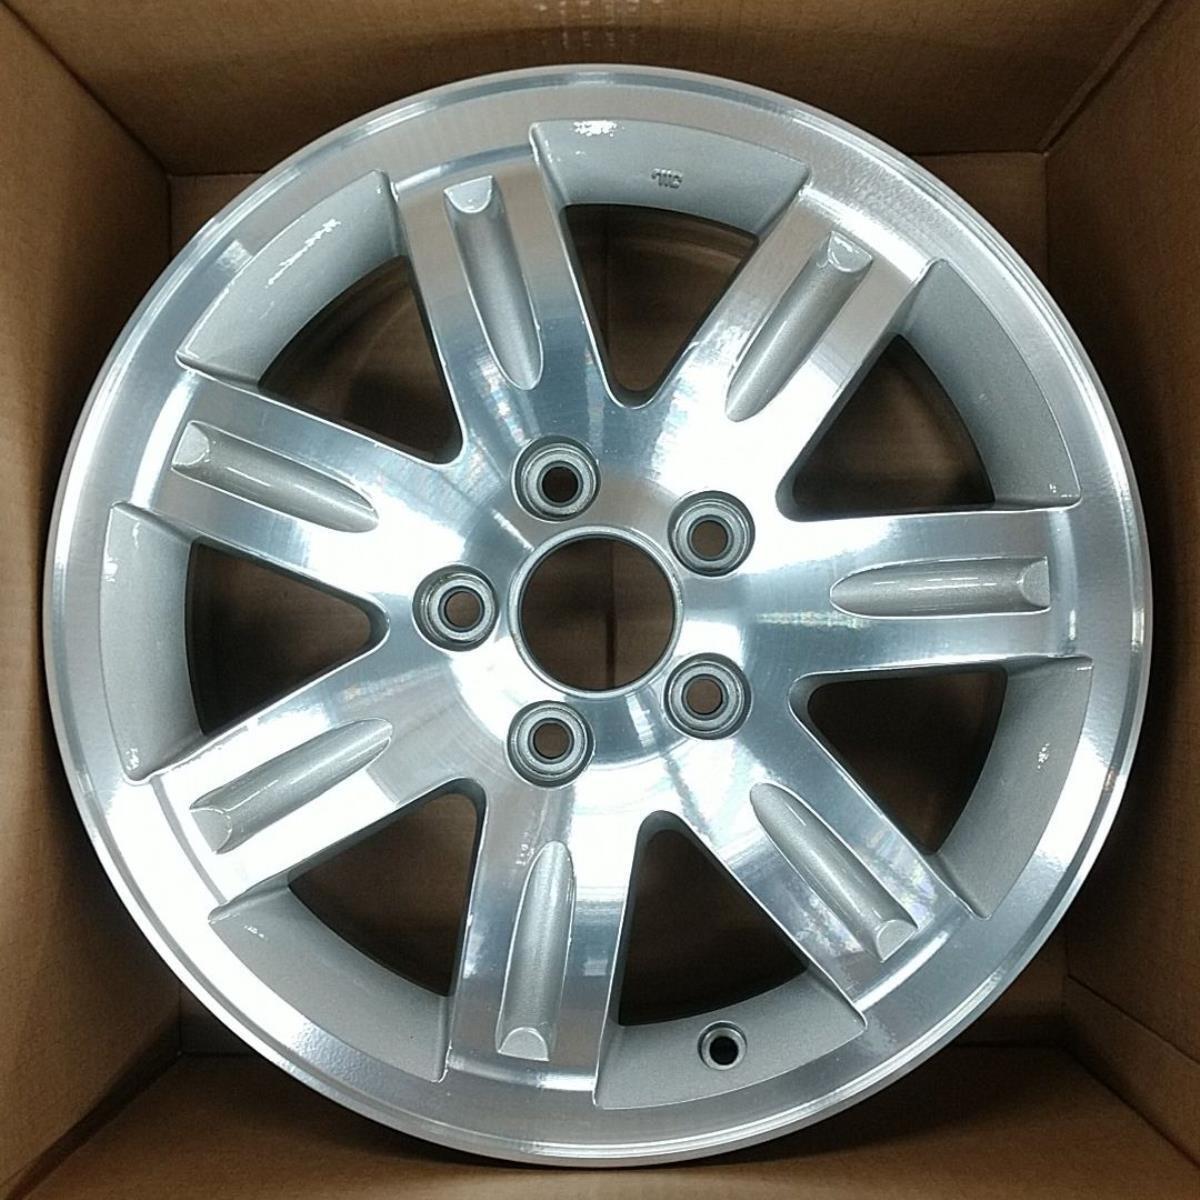 (1) Wheel Rim For Element Recon OEM Nice Silver Machined